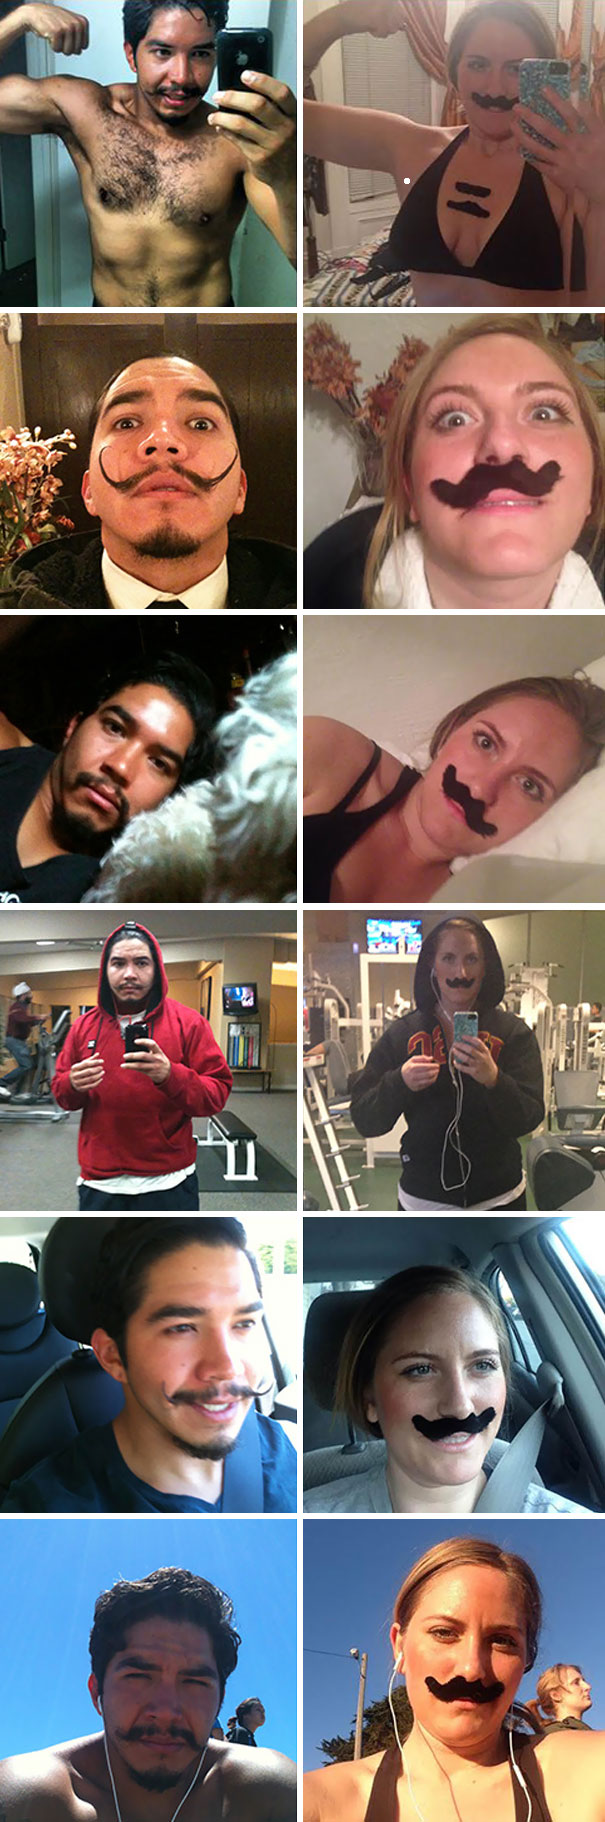 On January 1, 2013 My Phone Escaped Me And Somehow Fell Into The Hands Of A Man With A Killer Mustache. Thanks To Apple And Some Kinks In The Cloud, I Receive All Of His Pictures In My Photo Stream. Here Are His Selfies As Re-Enacted By Yours Truly